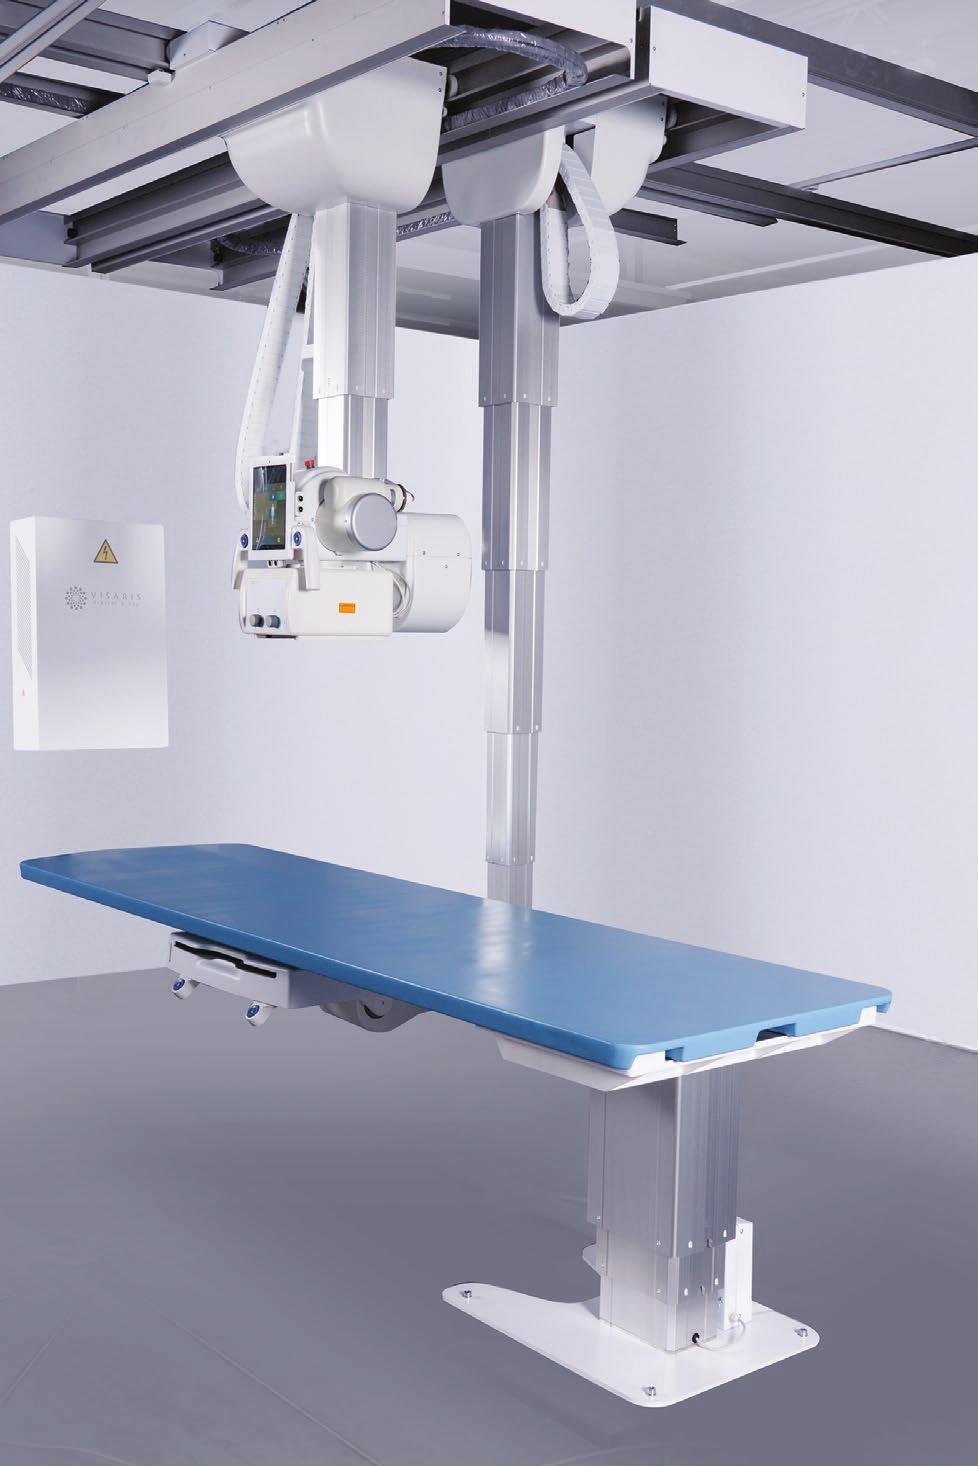 Vision Air is a state-of-the-art, universal, overhead digital radiography system capable of virtually all radiography examinations with a